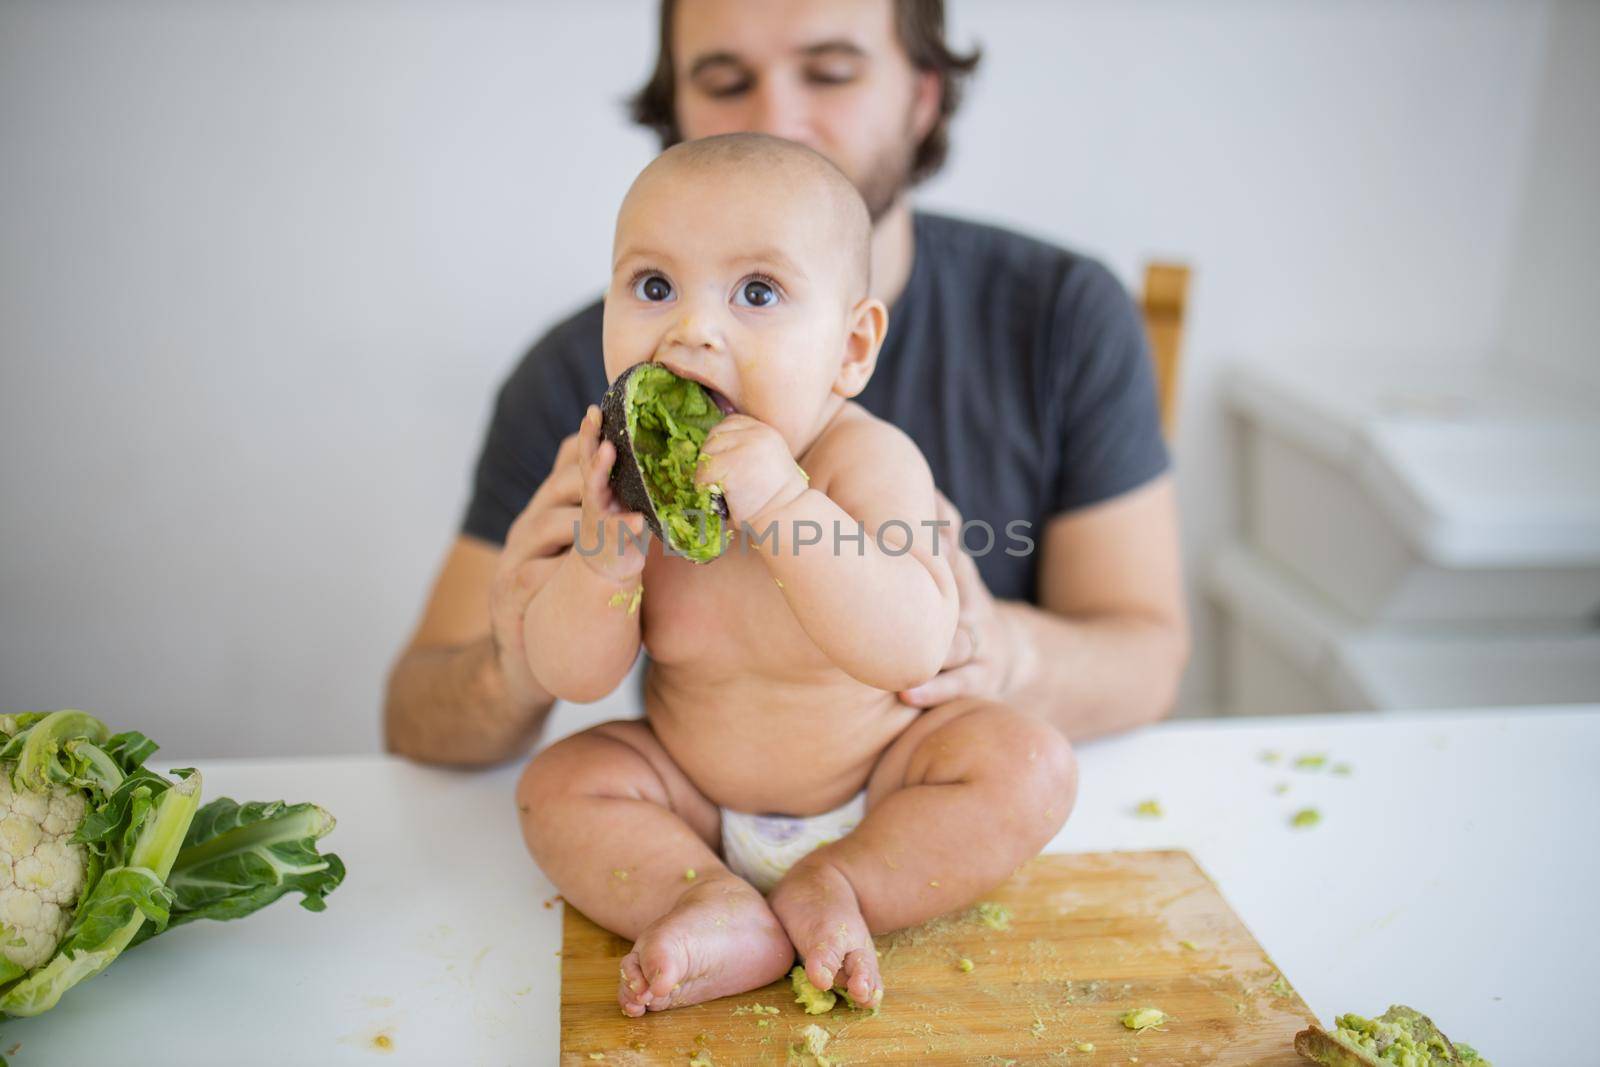 Father lovingly holding his happy baby daughter above table. Adorable baby sitting on wooden board and biting avocado peel. Babies interacting with food